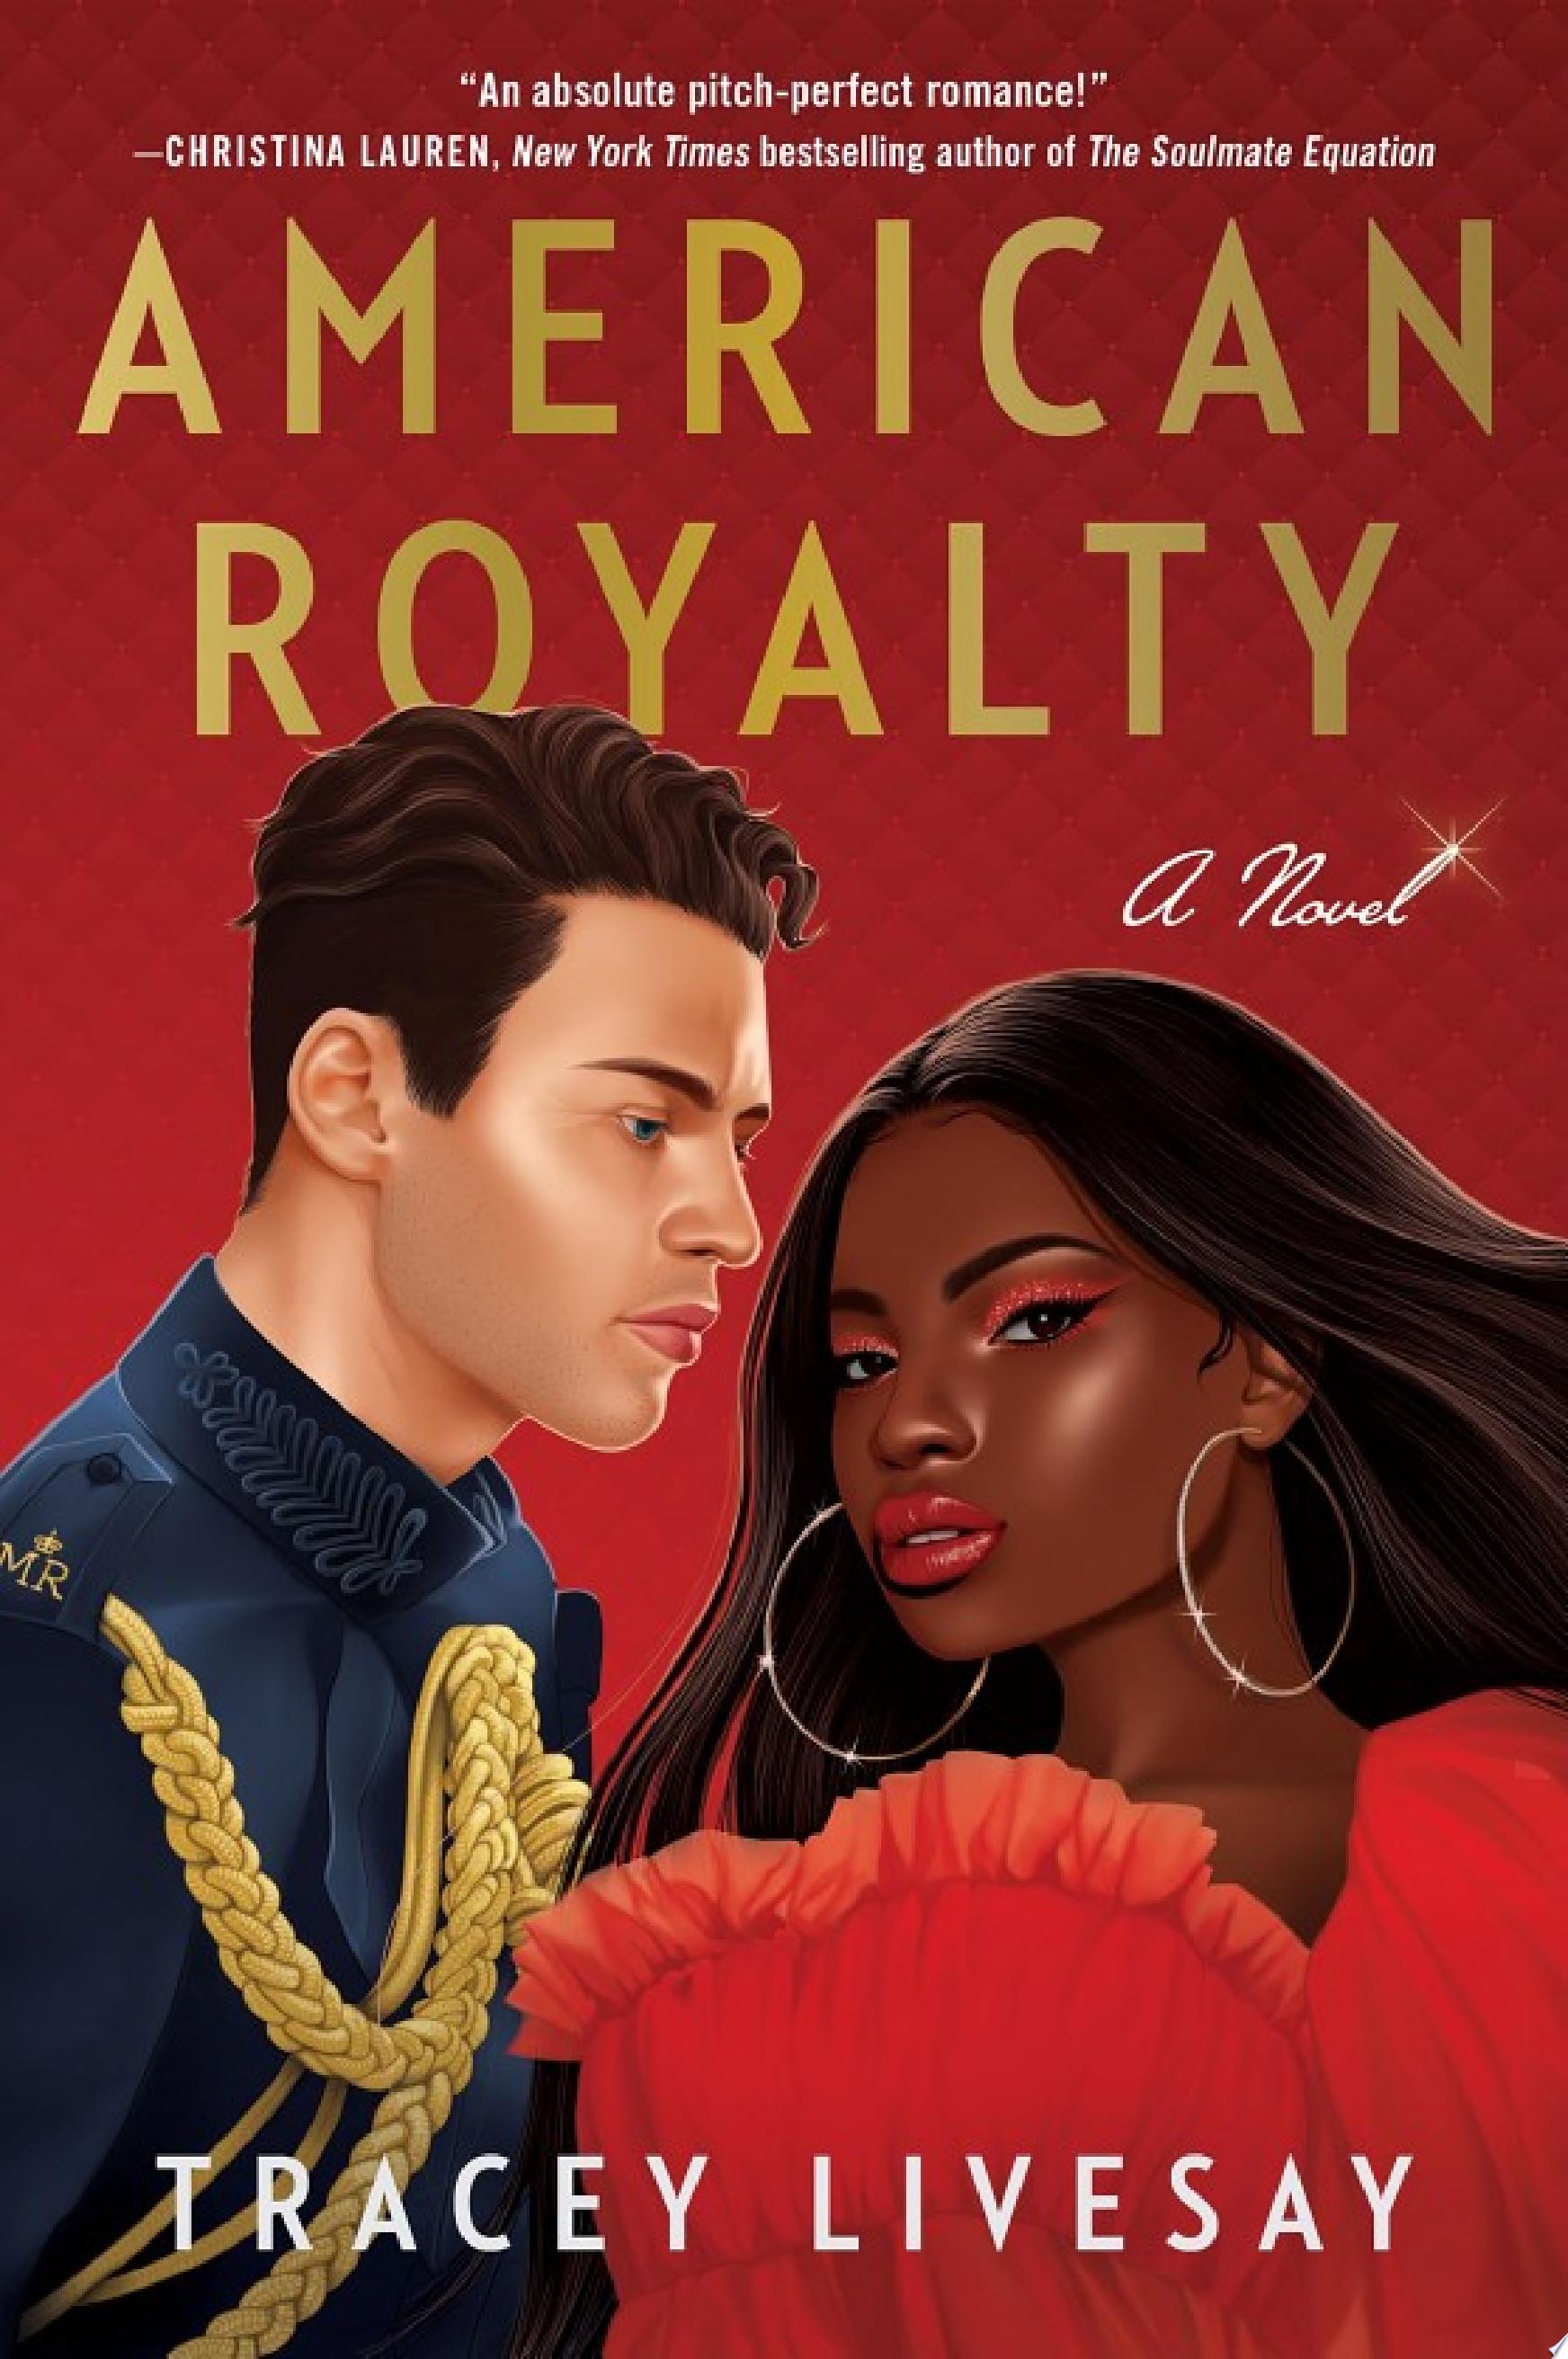 Image for "American Royalty"